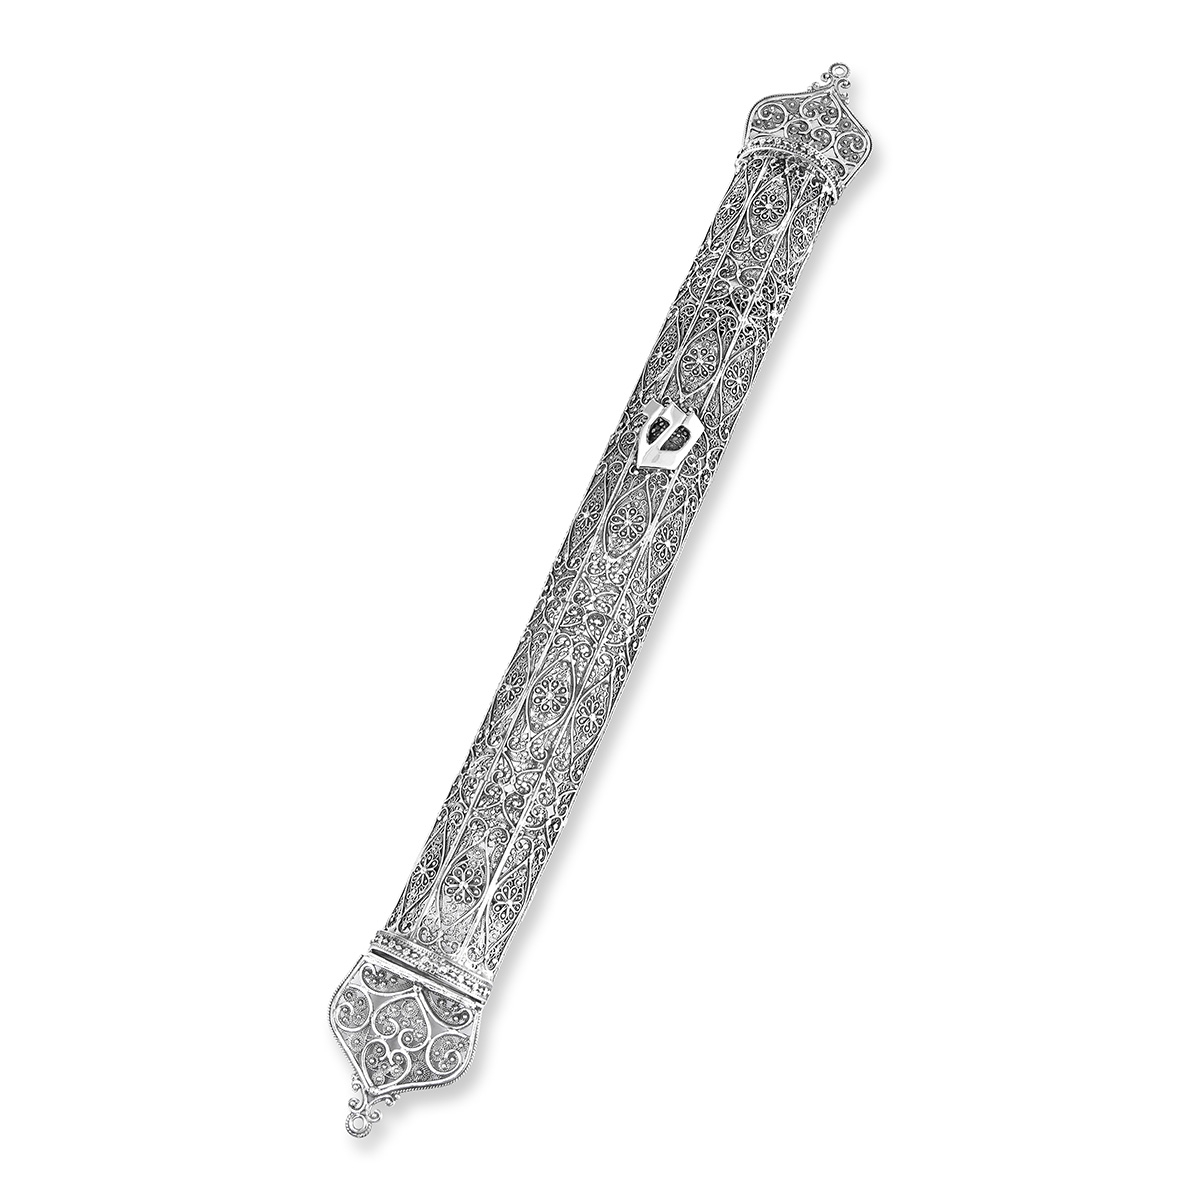 Traditional Yemenite Art Deluxe Handcrafted Sterling Silver Extra Large Mezuzah Case With Filigree Design - 1